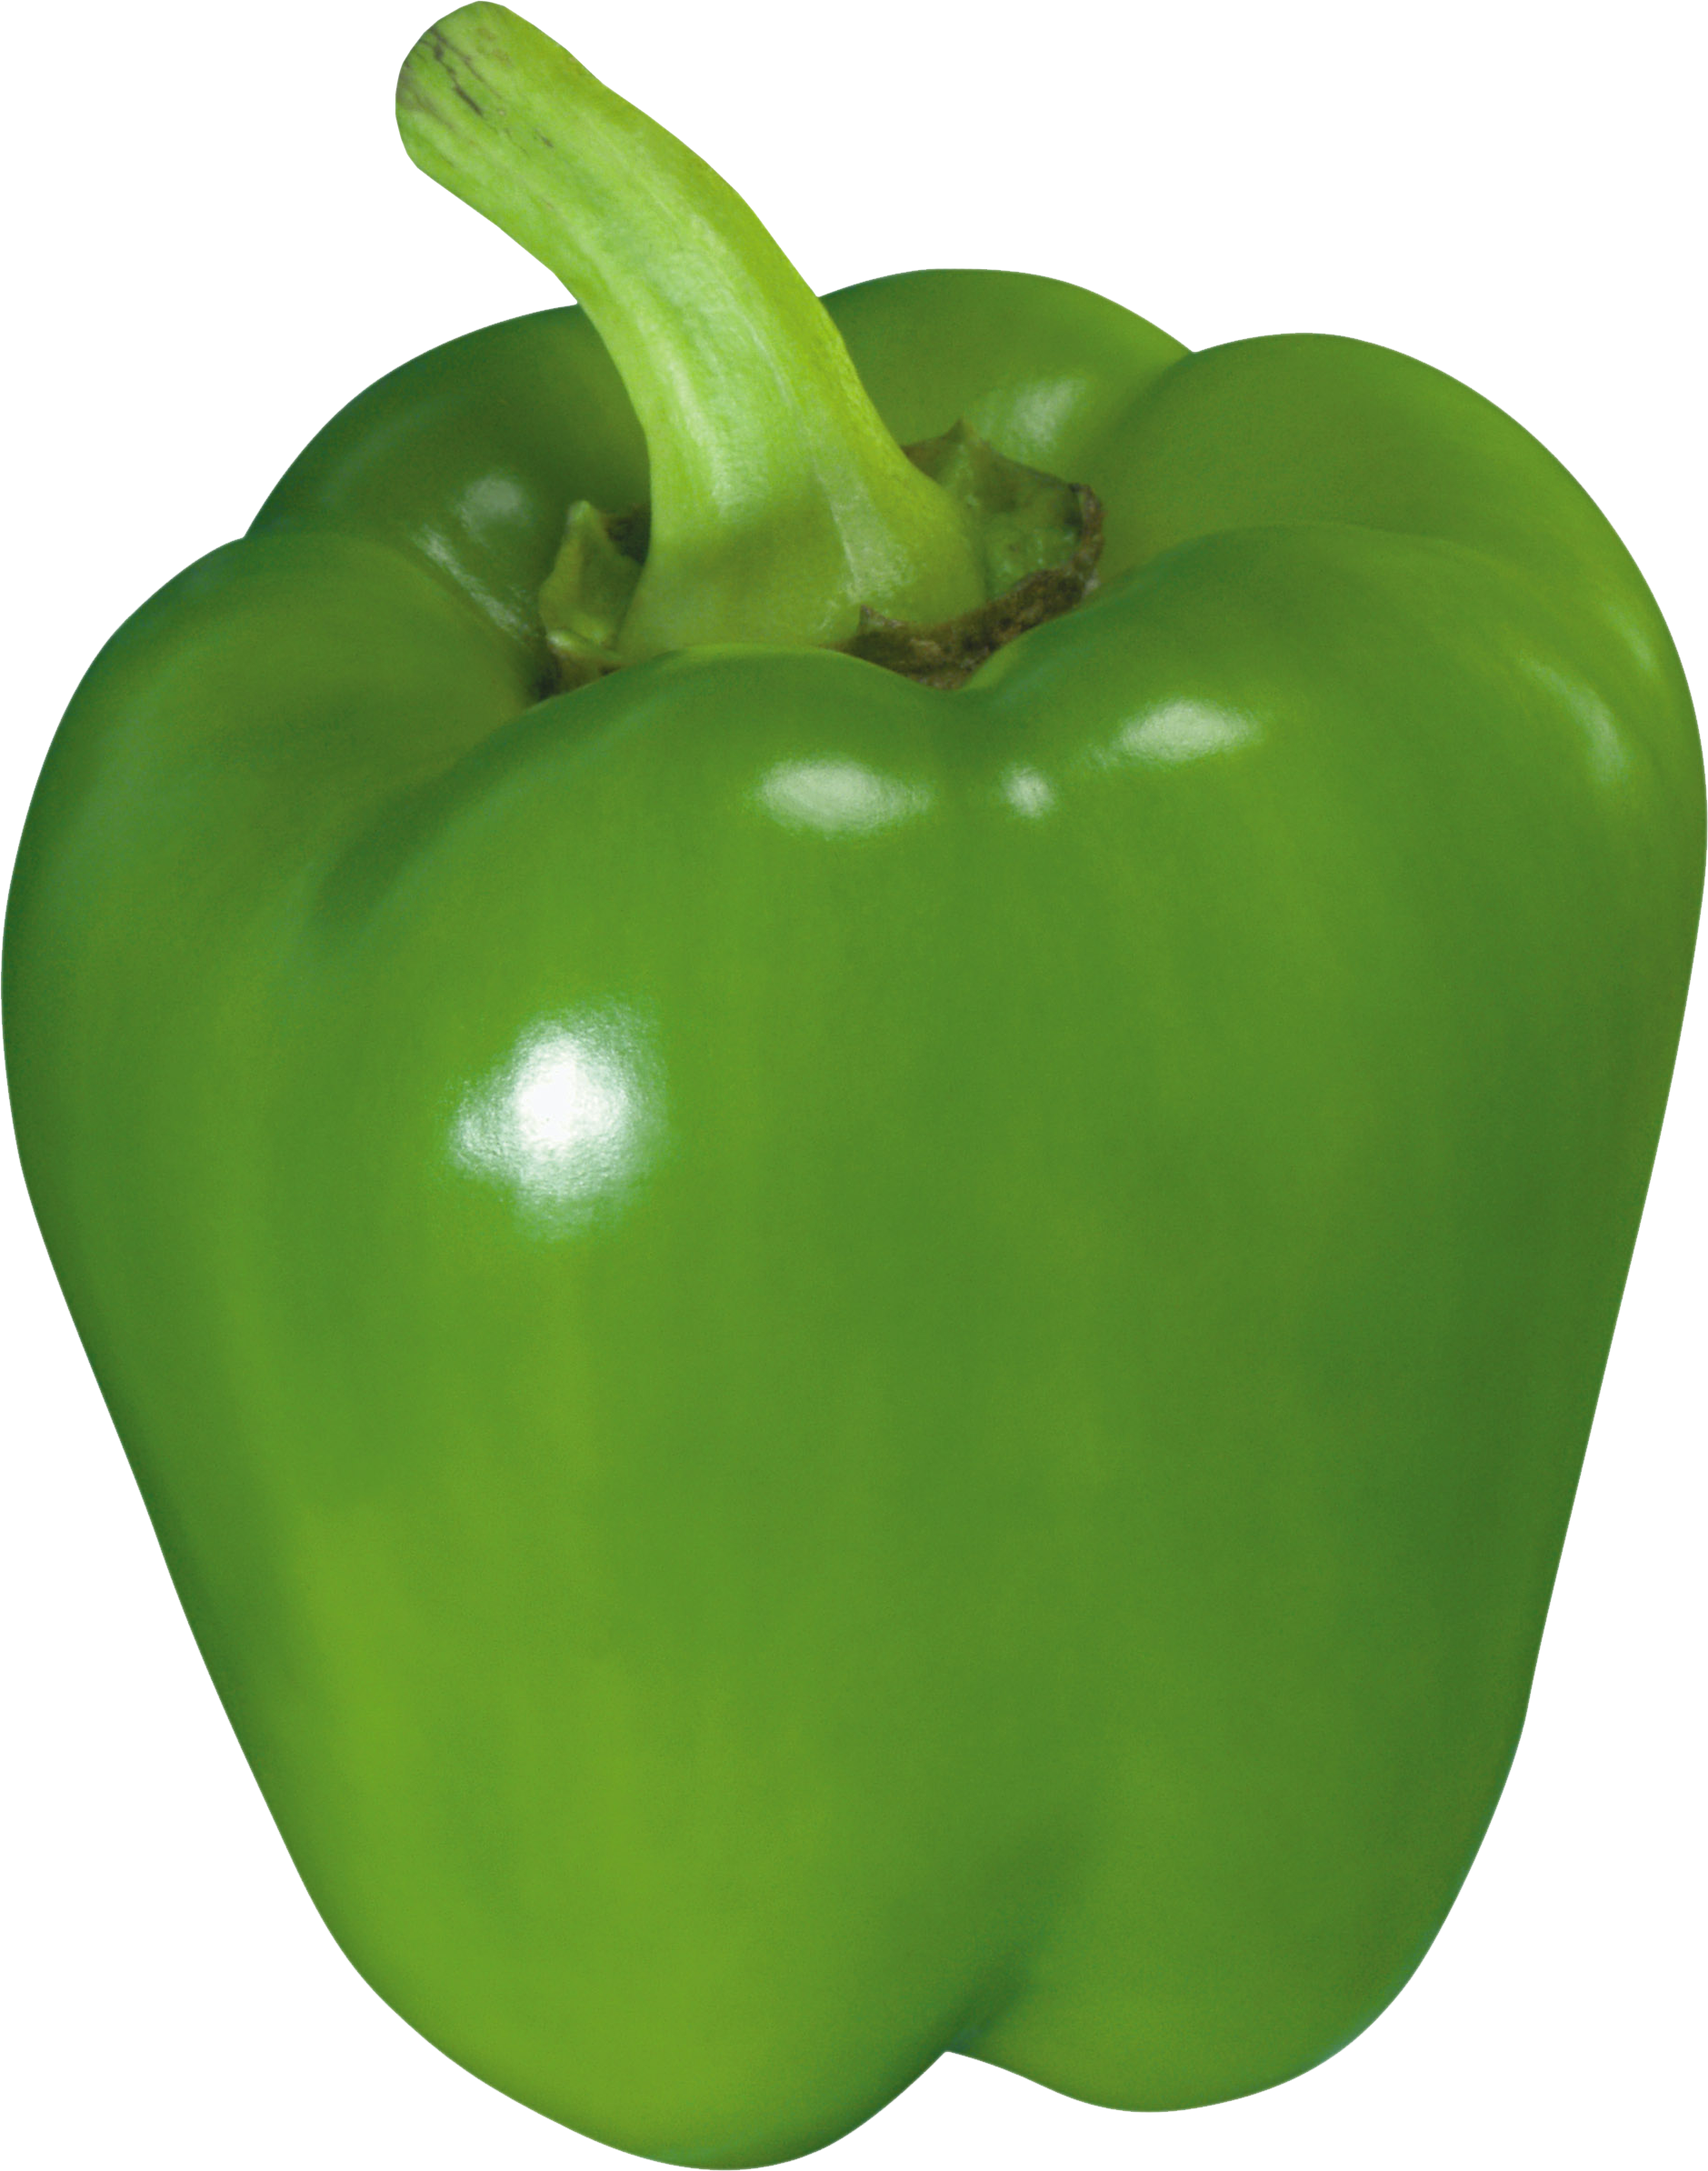 Png image free download. Pepper clipart sweet pepper